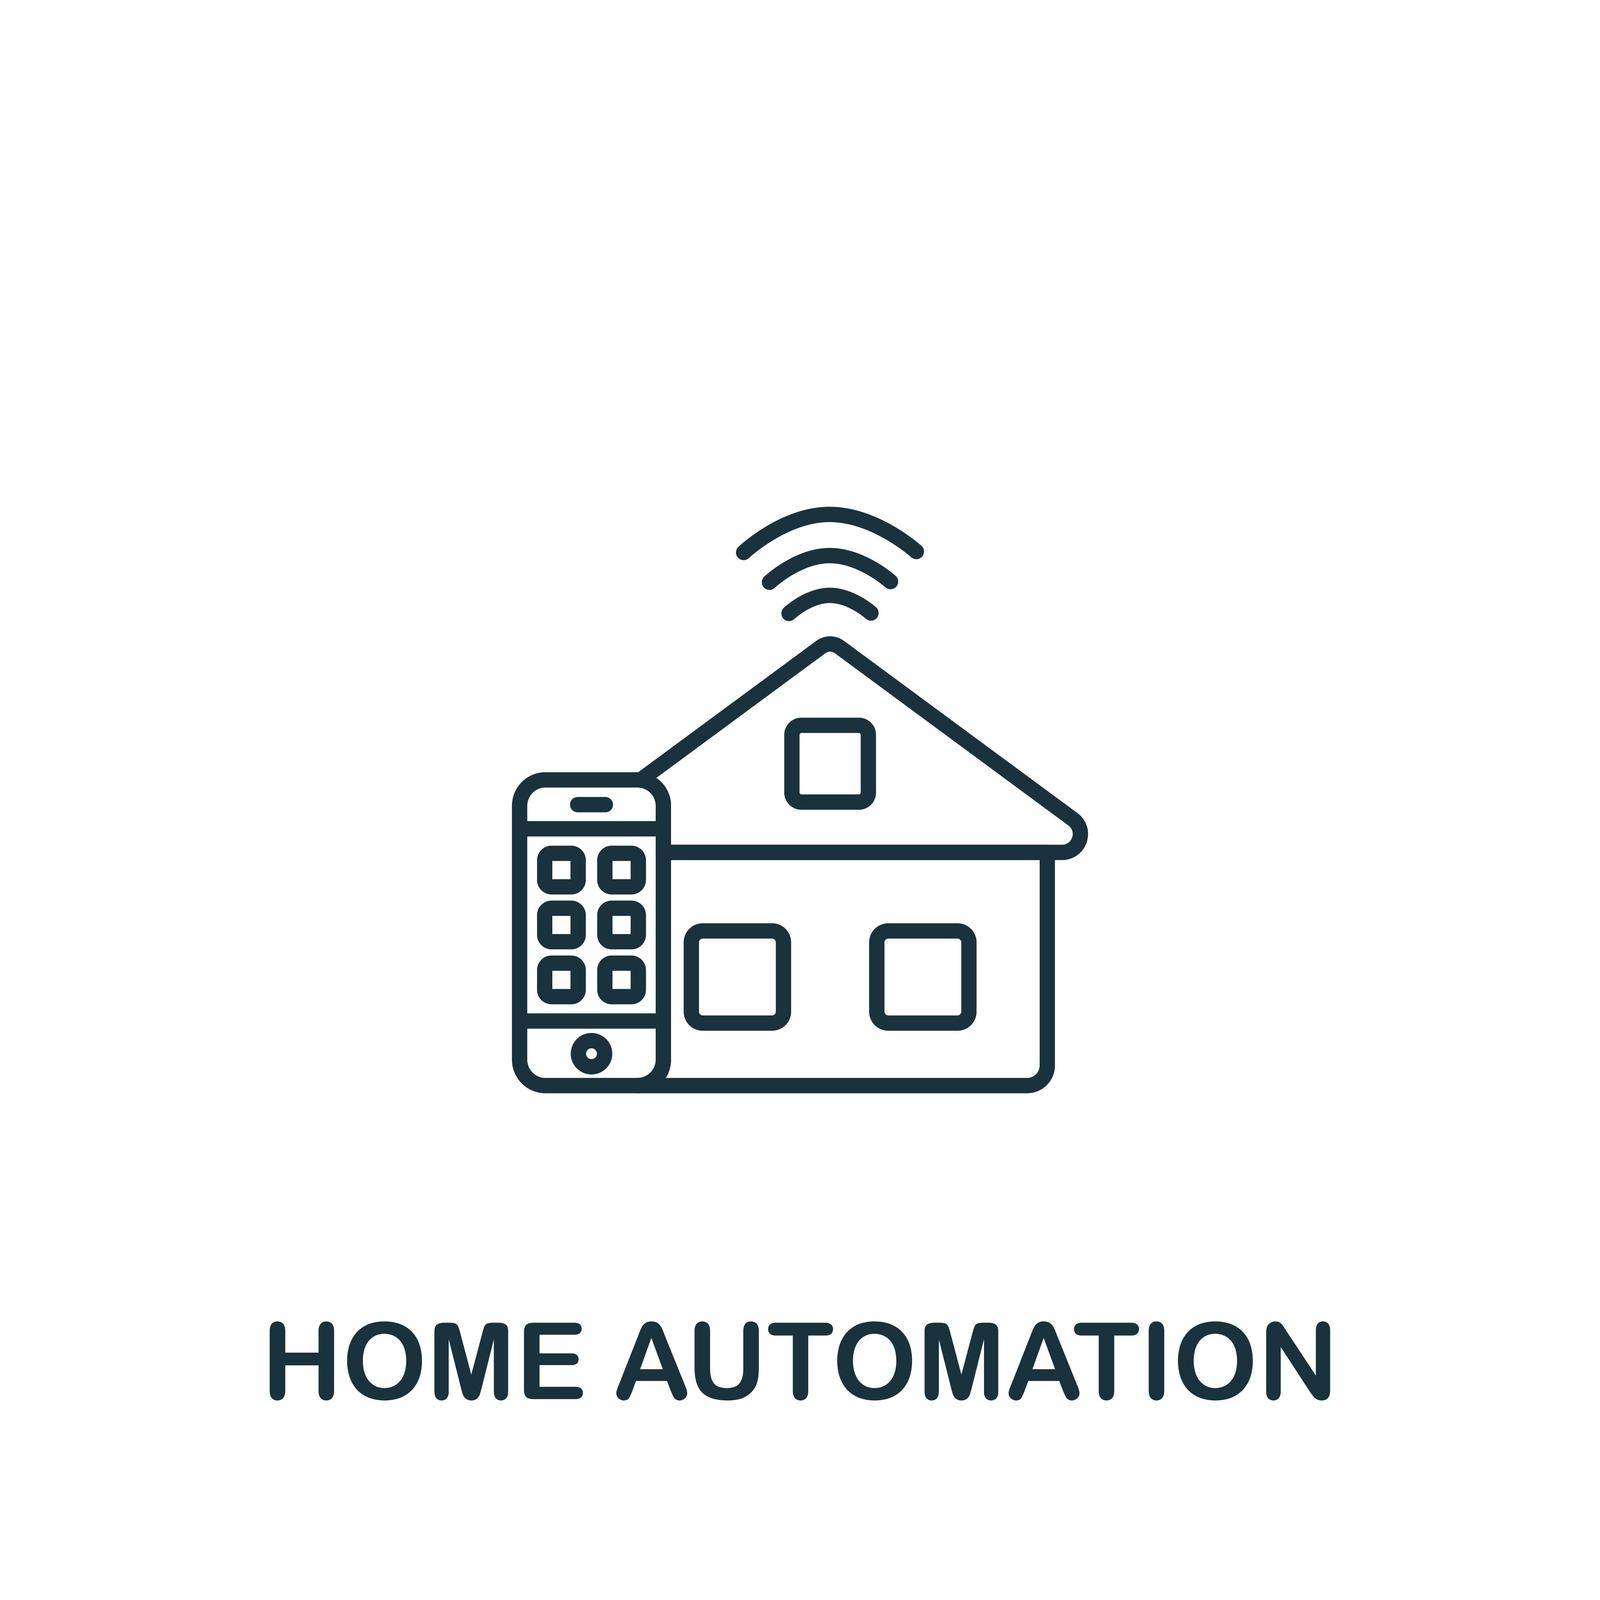 Home Automation icon. Line simple icon for templates, web design and infographics by simakovavector